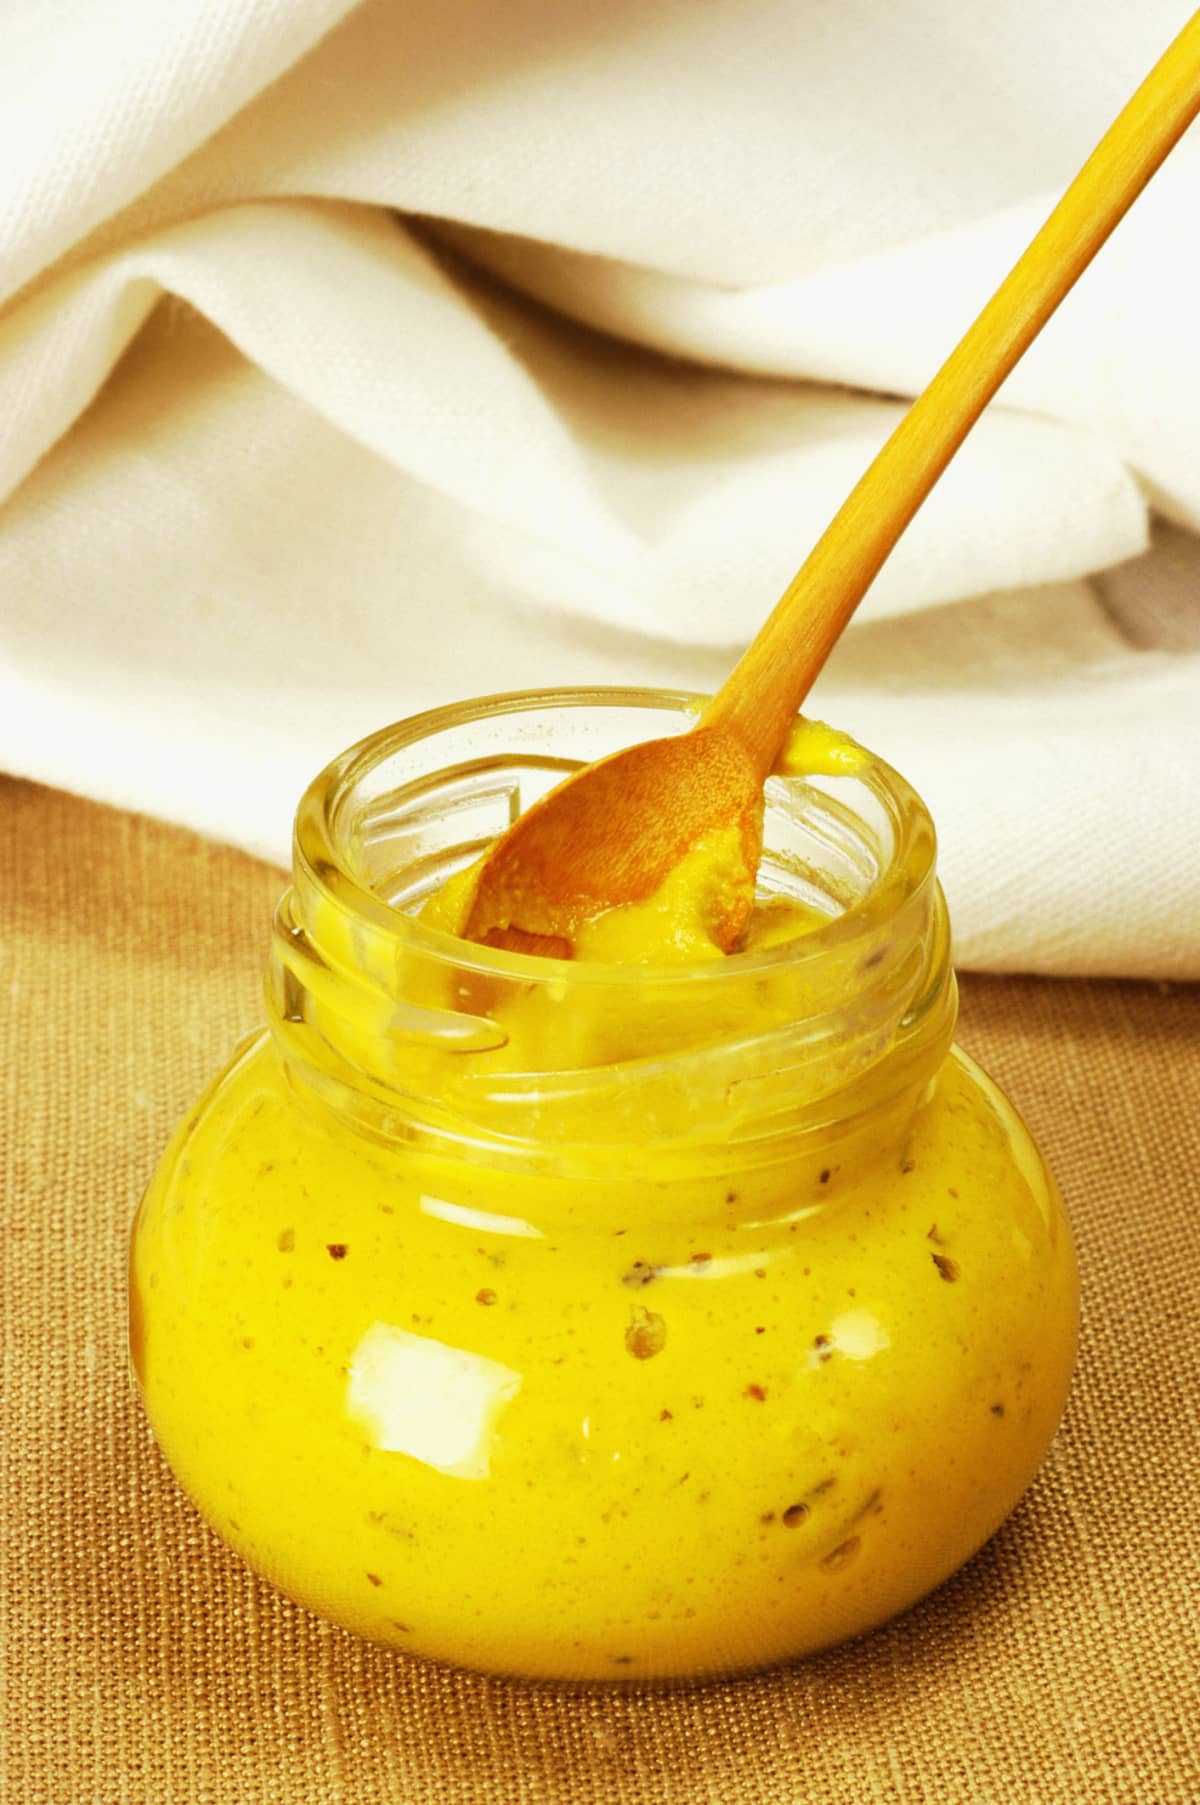 Glass jar of mustard with wooden spoon